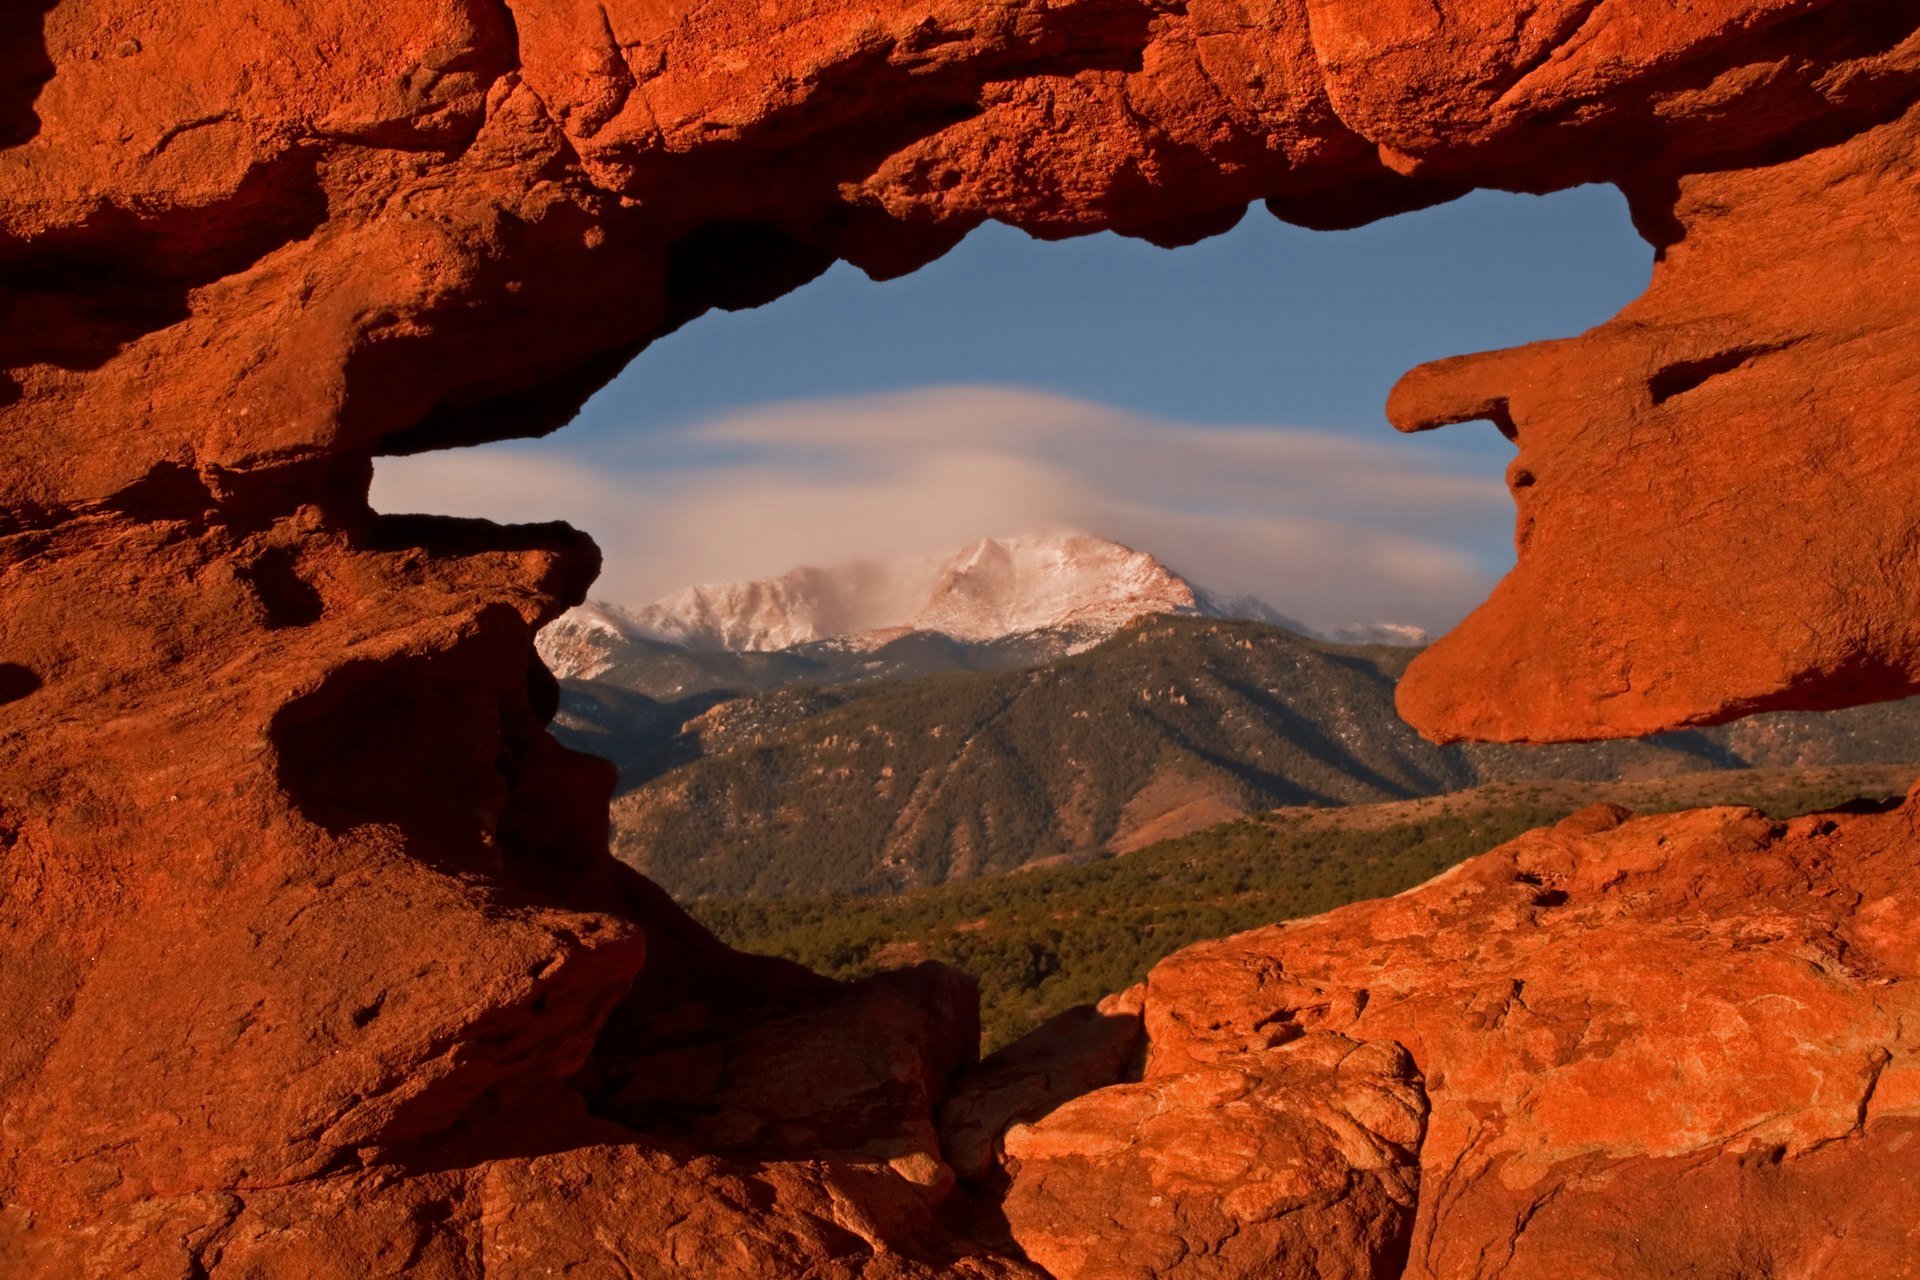 Pikes Peak through the Rock Formation